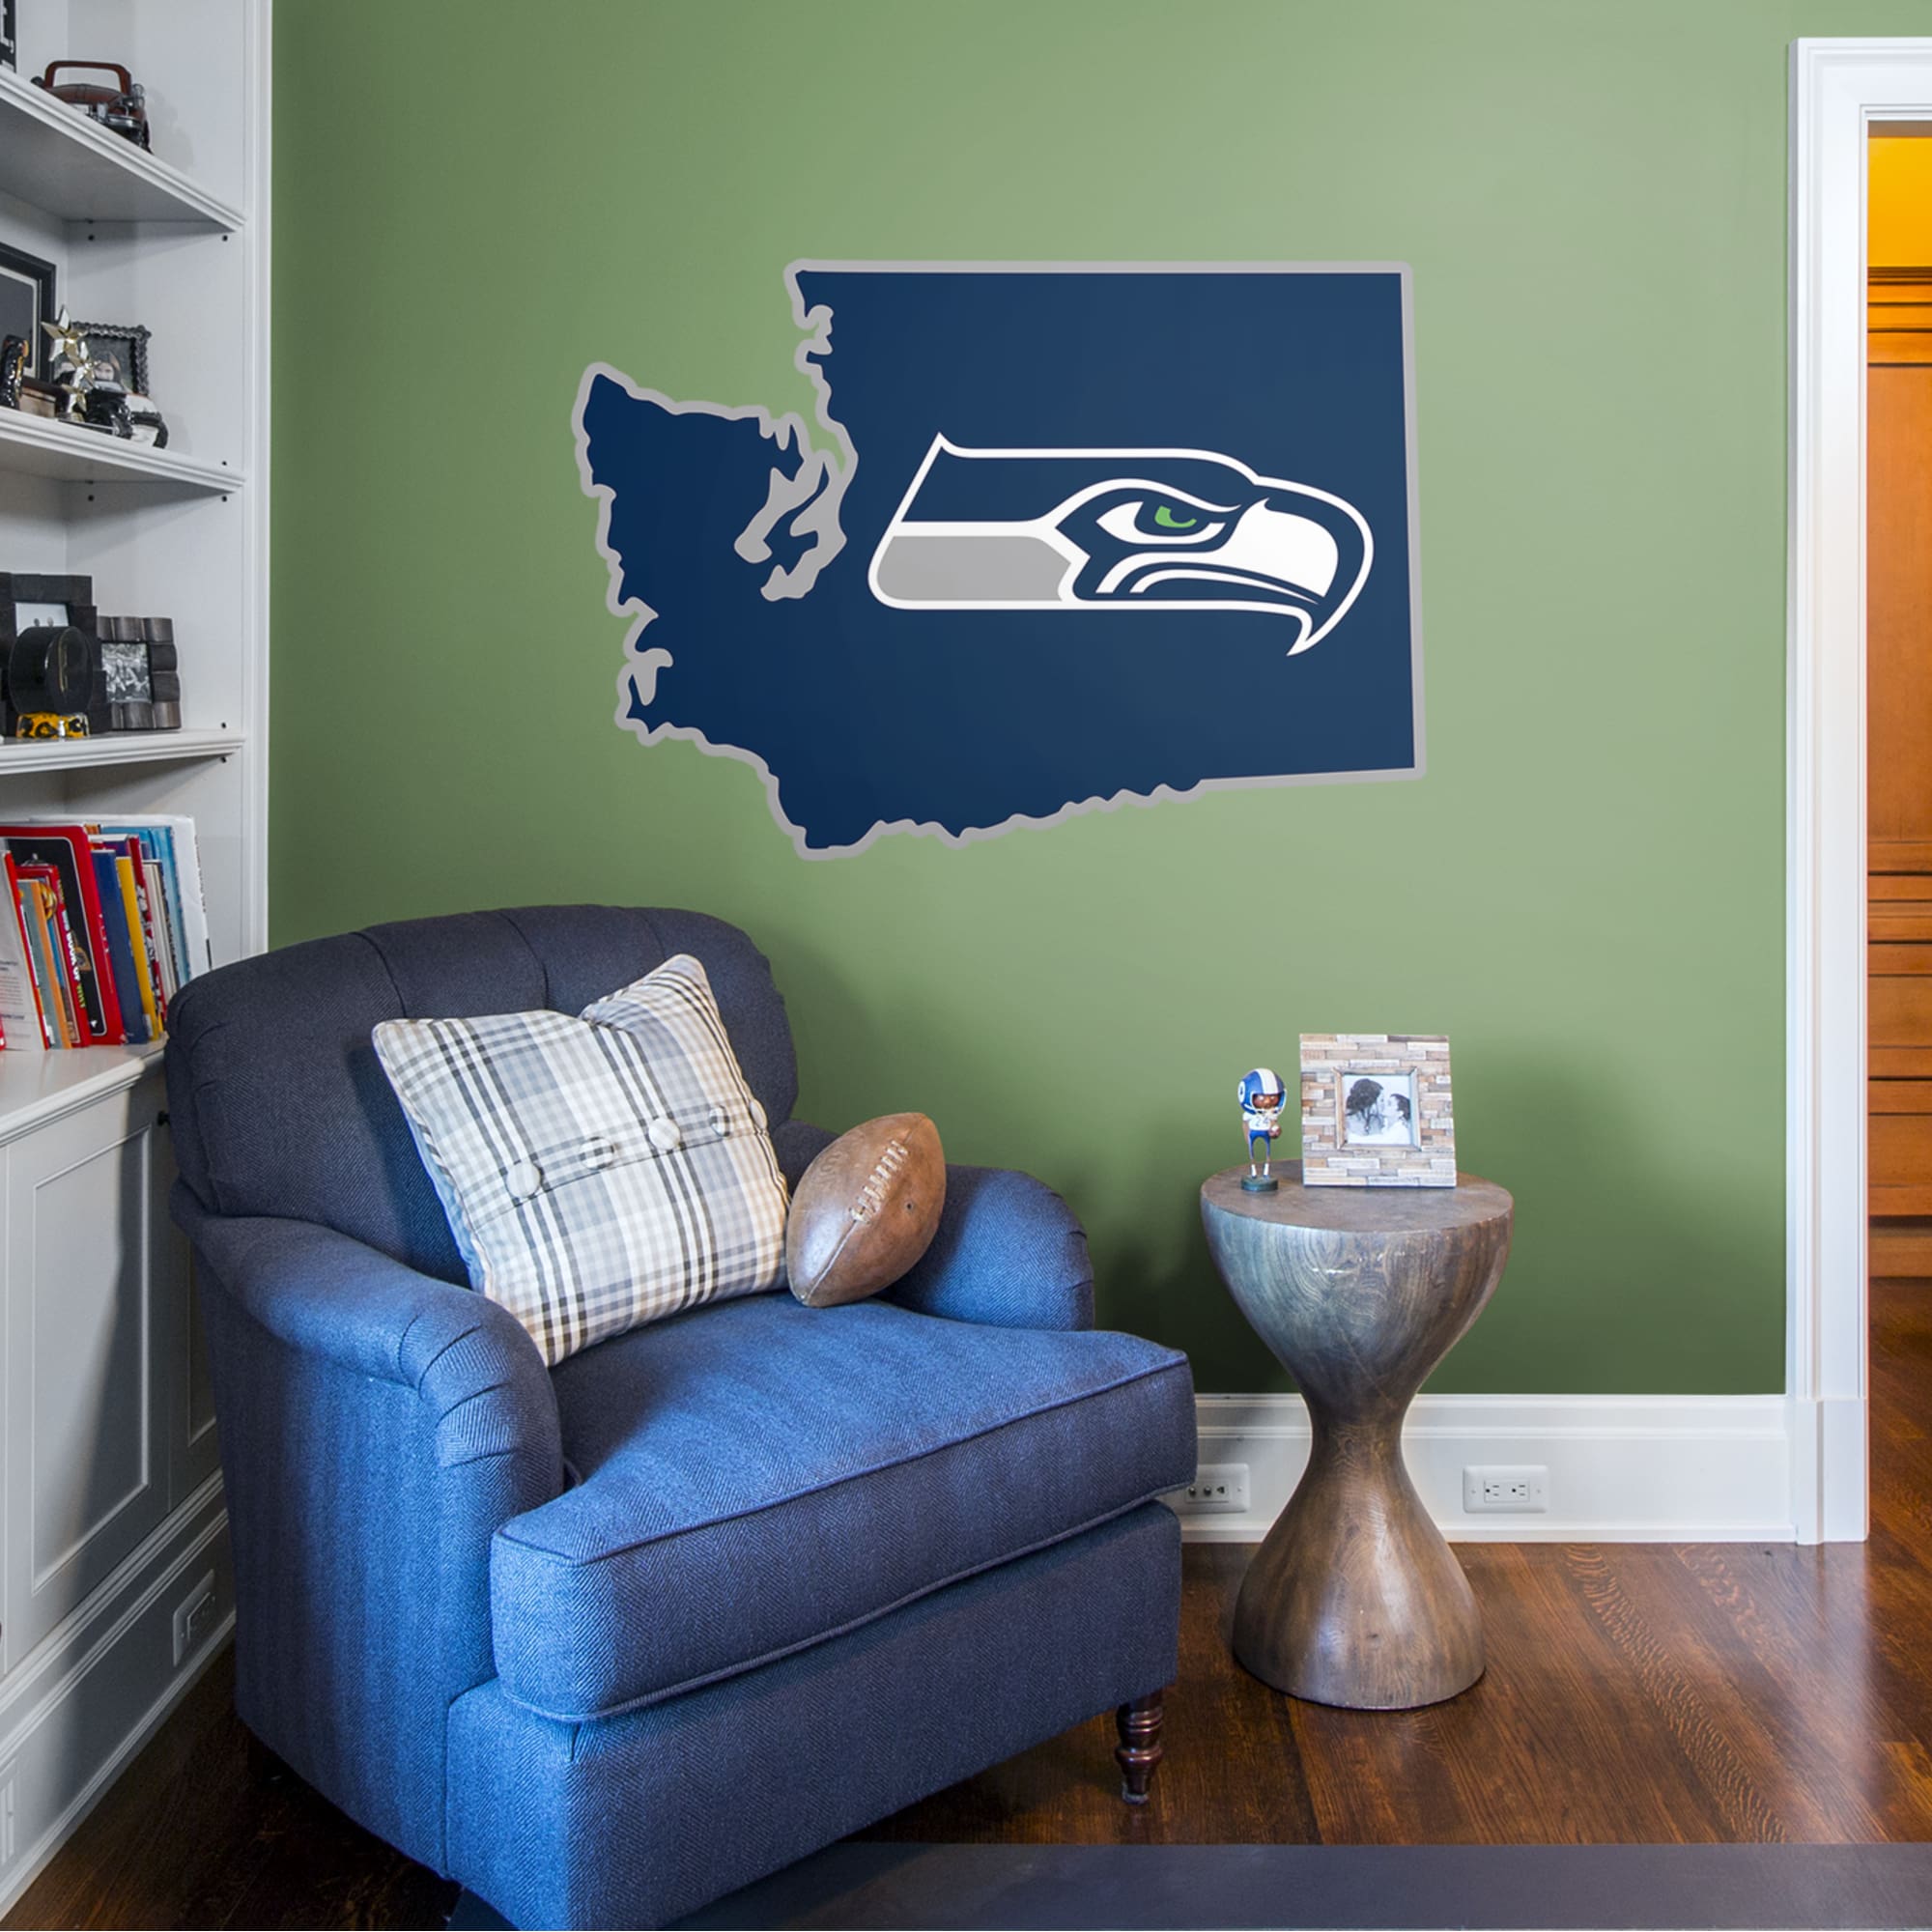 Seattle Seahawks: State of Washington - Officially Licensed NFL Removable Wall Decal 50.0"W x 35.0"H by Fathead | Vinyl